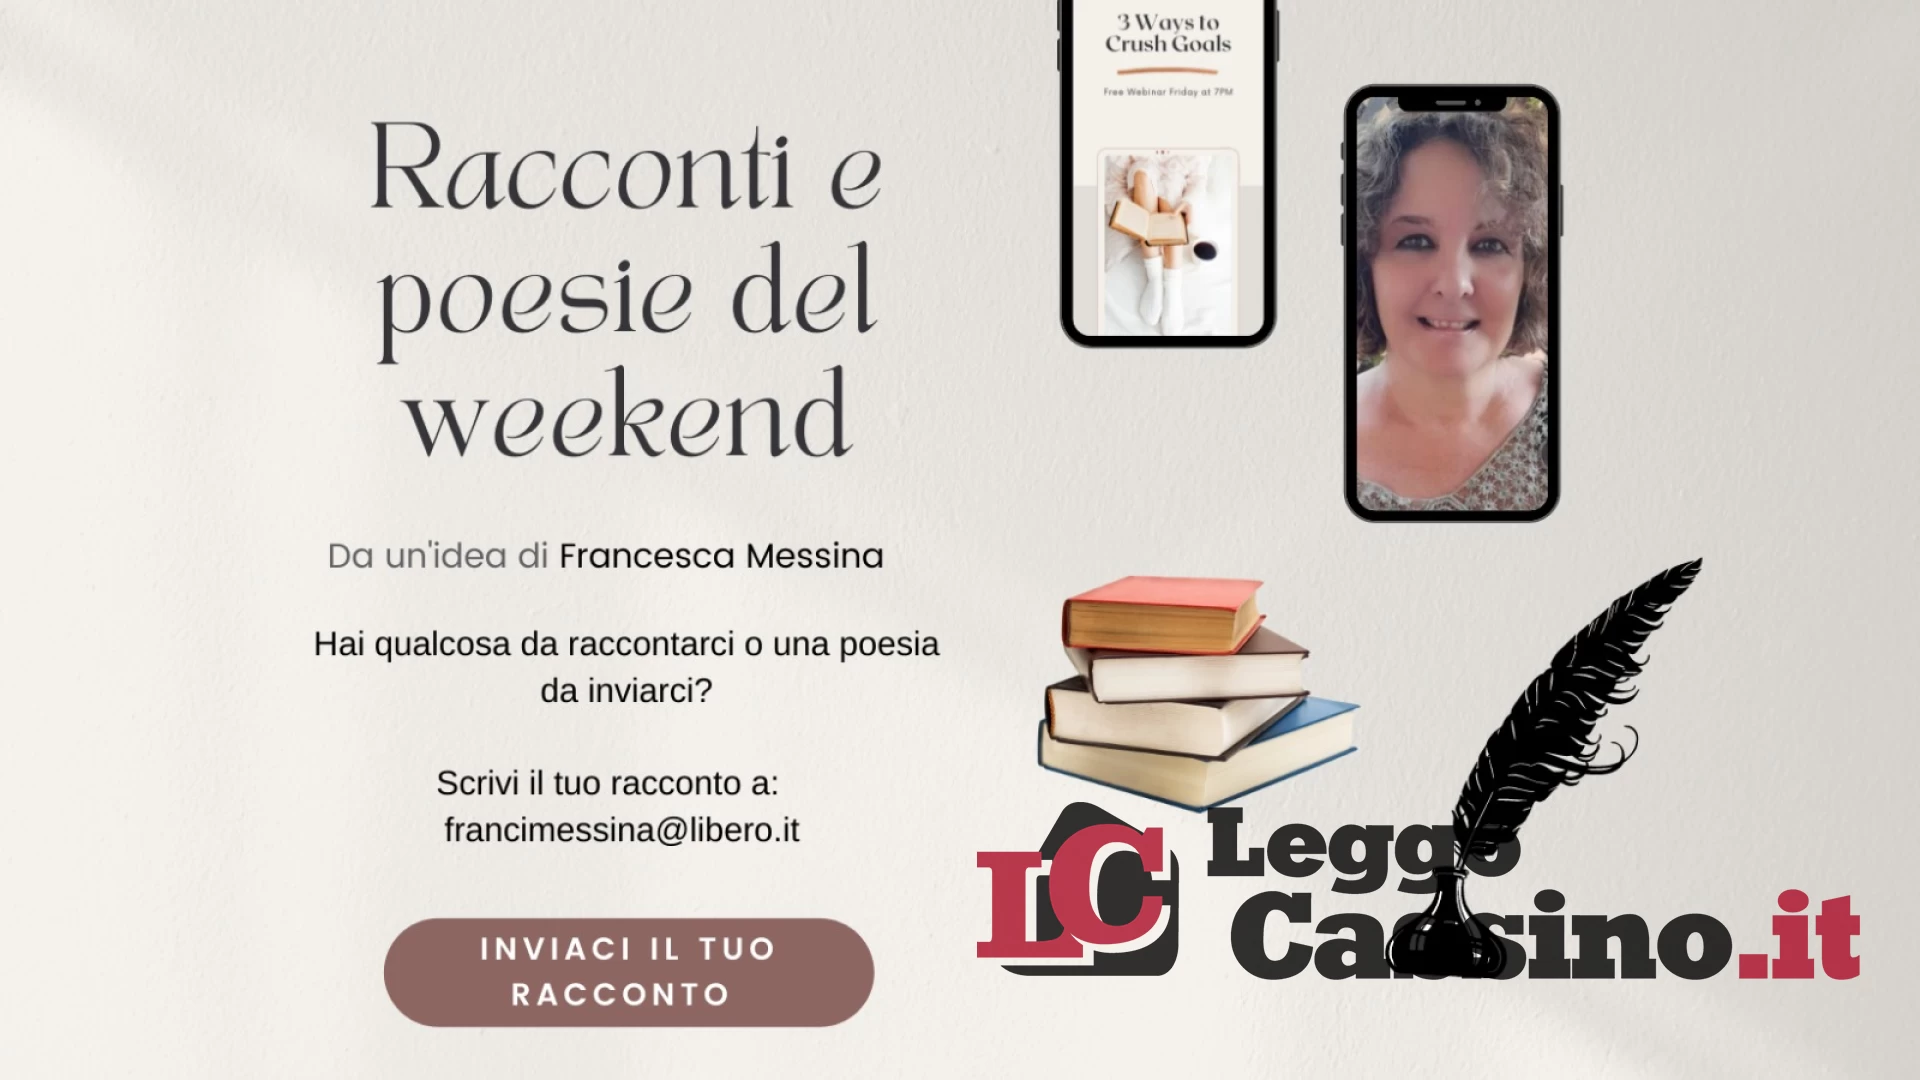 Racconti e Poesie del weekend "Tra le stelle"